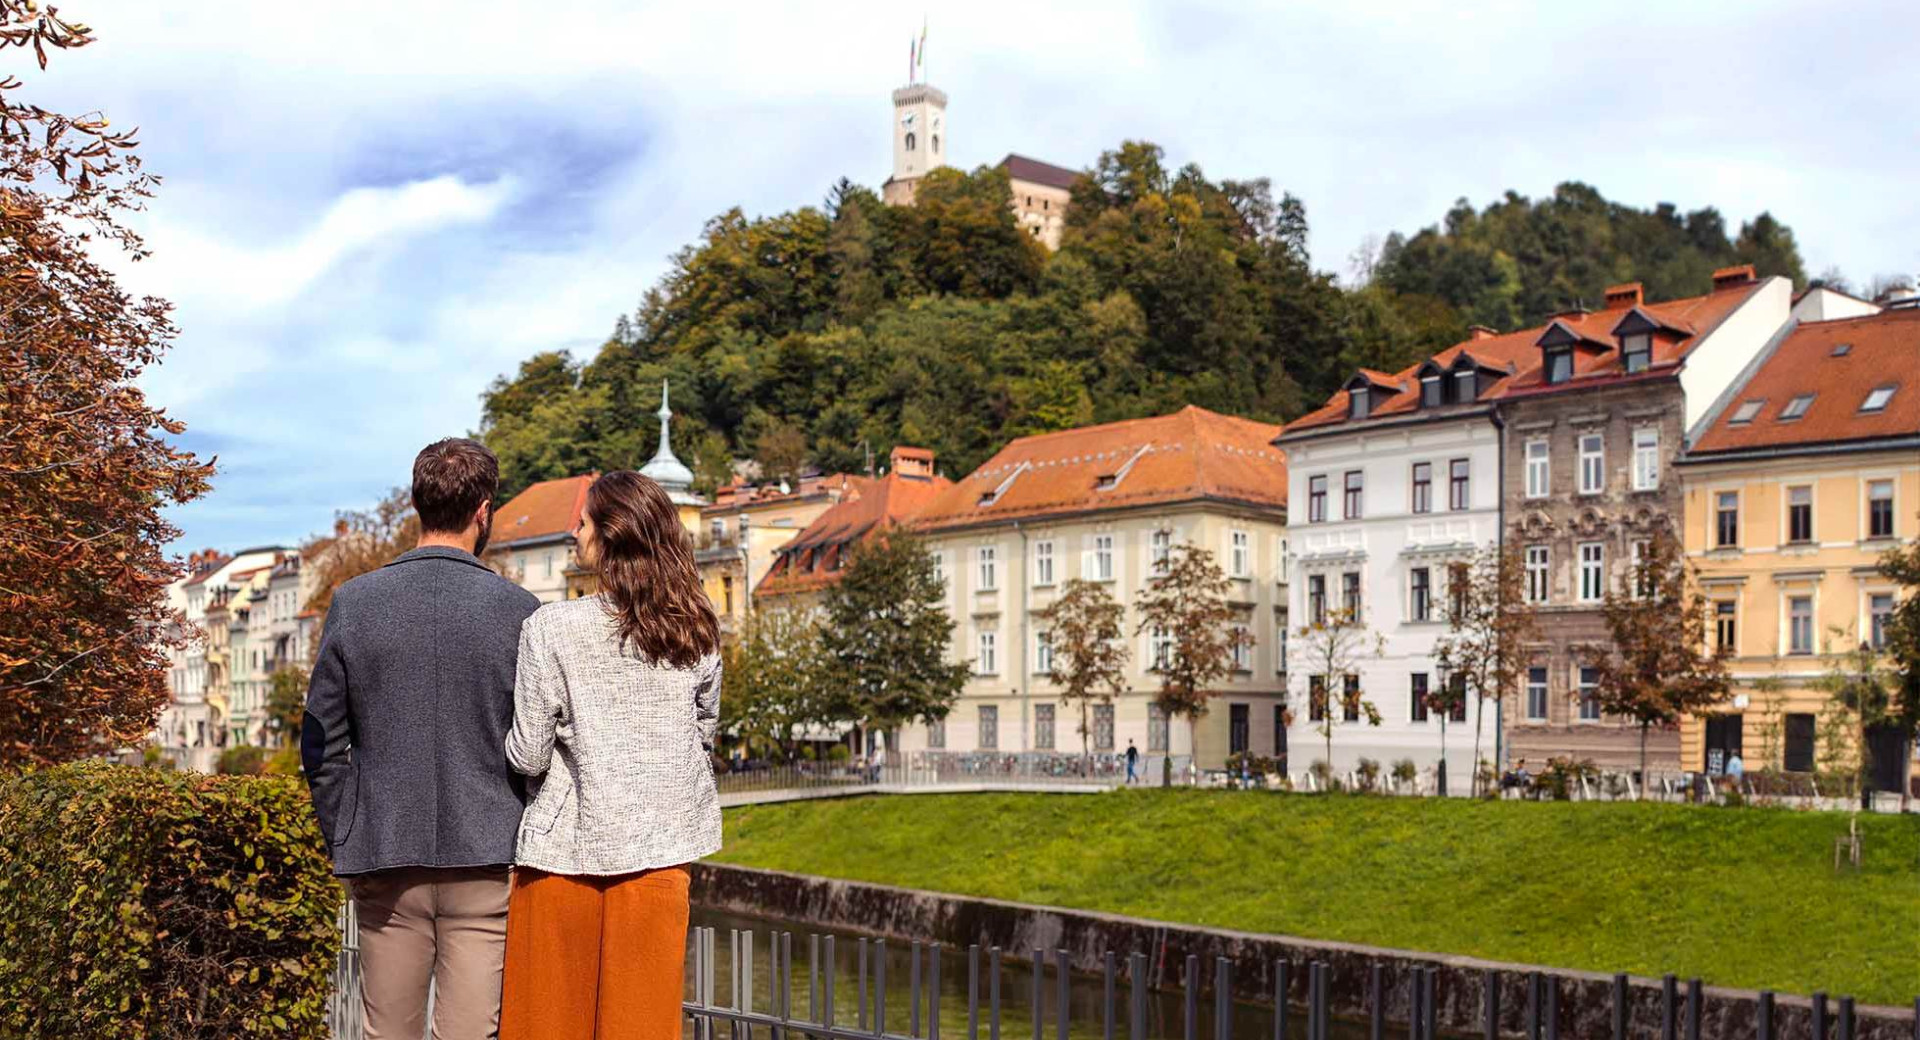 A couple in love on the embankment of the Ljubljanica river, with the Ljubljana Castle in the background.